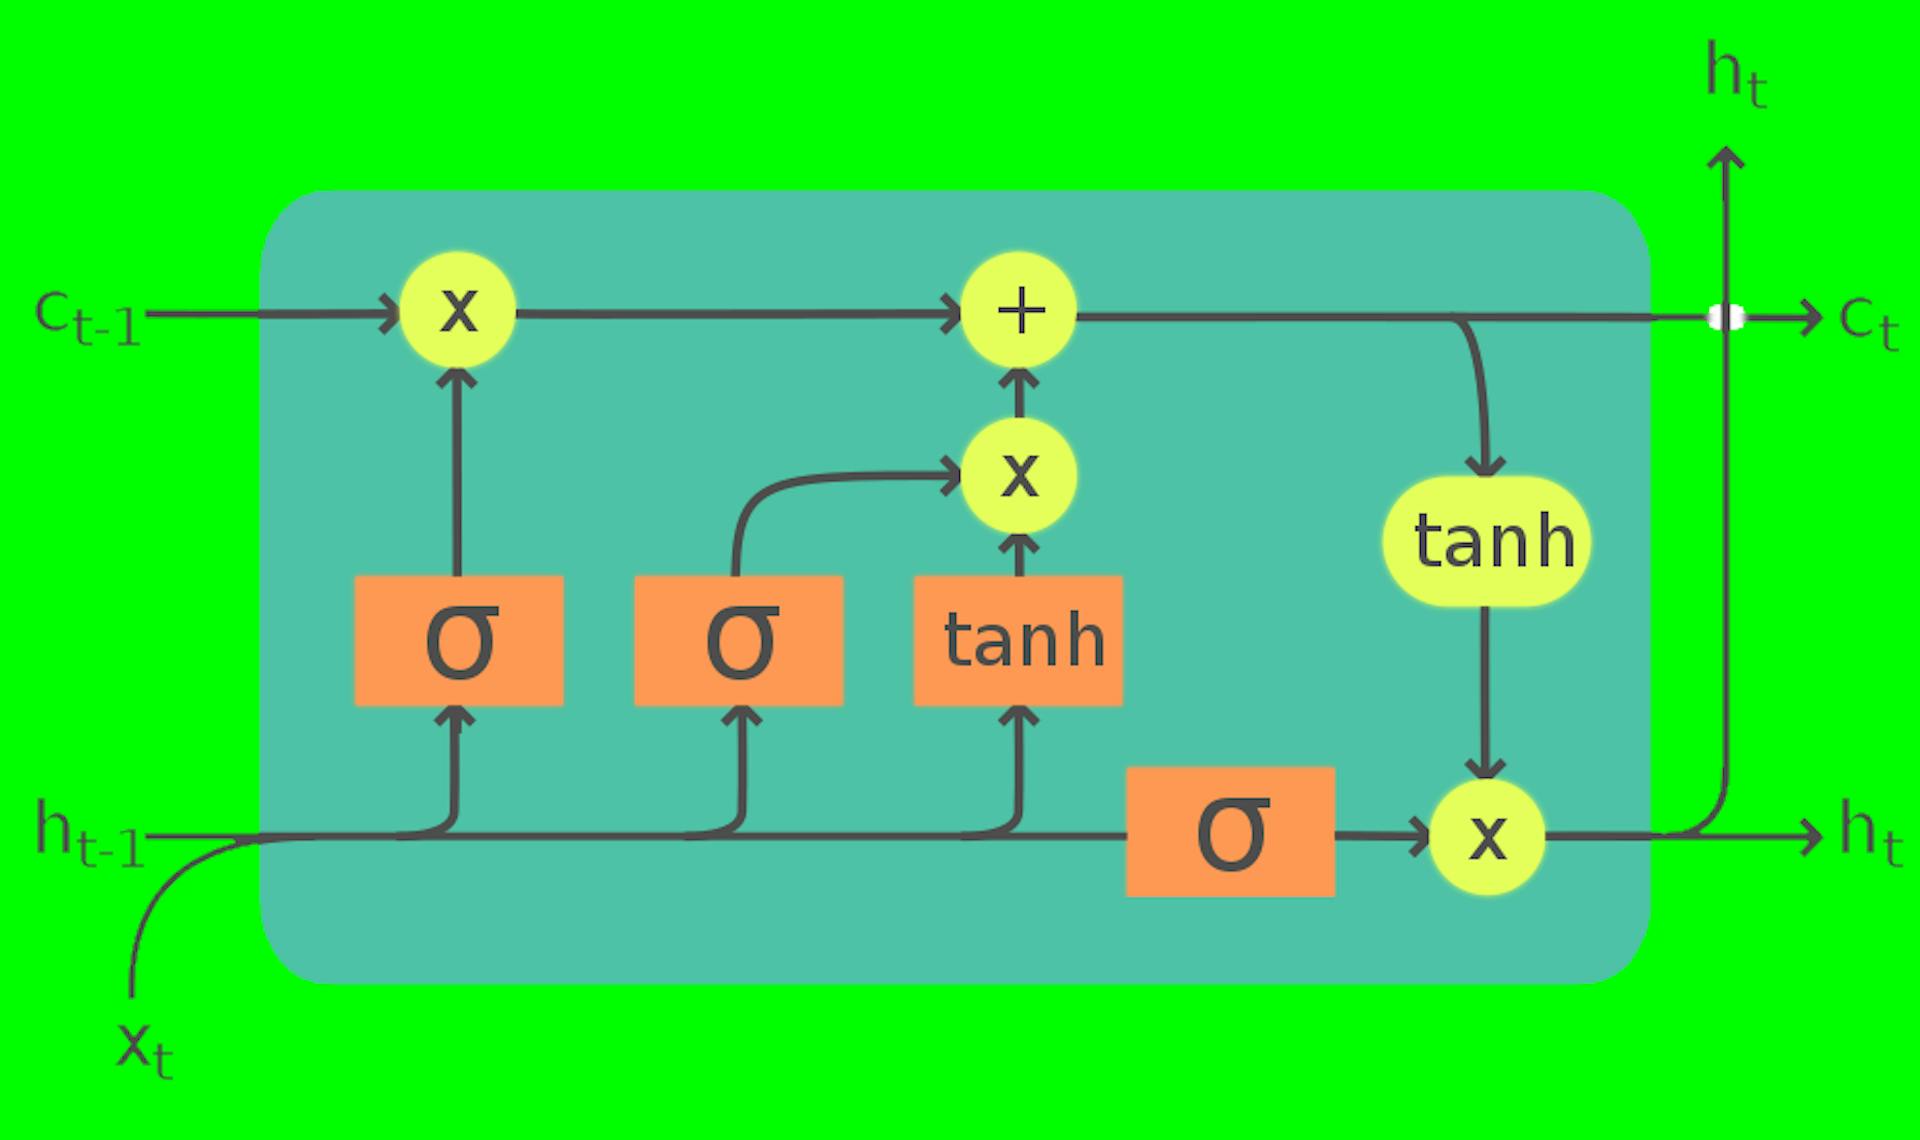 LSTM cell architecture